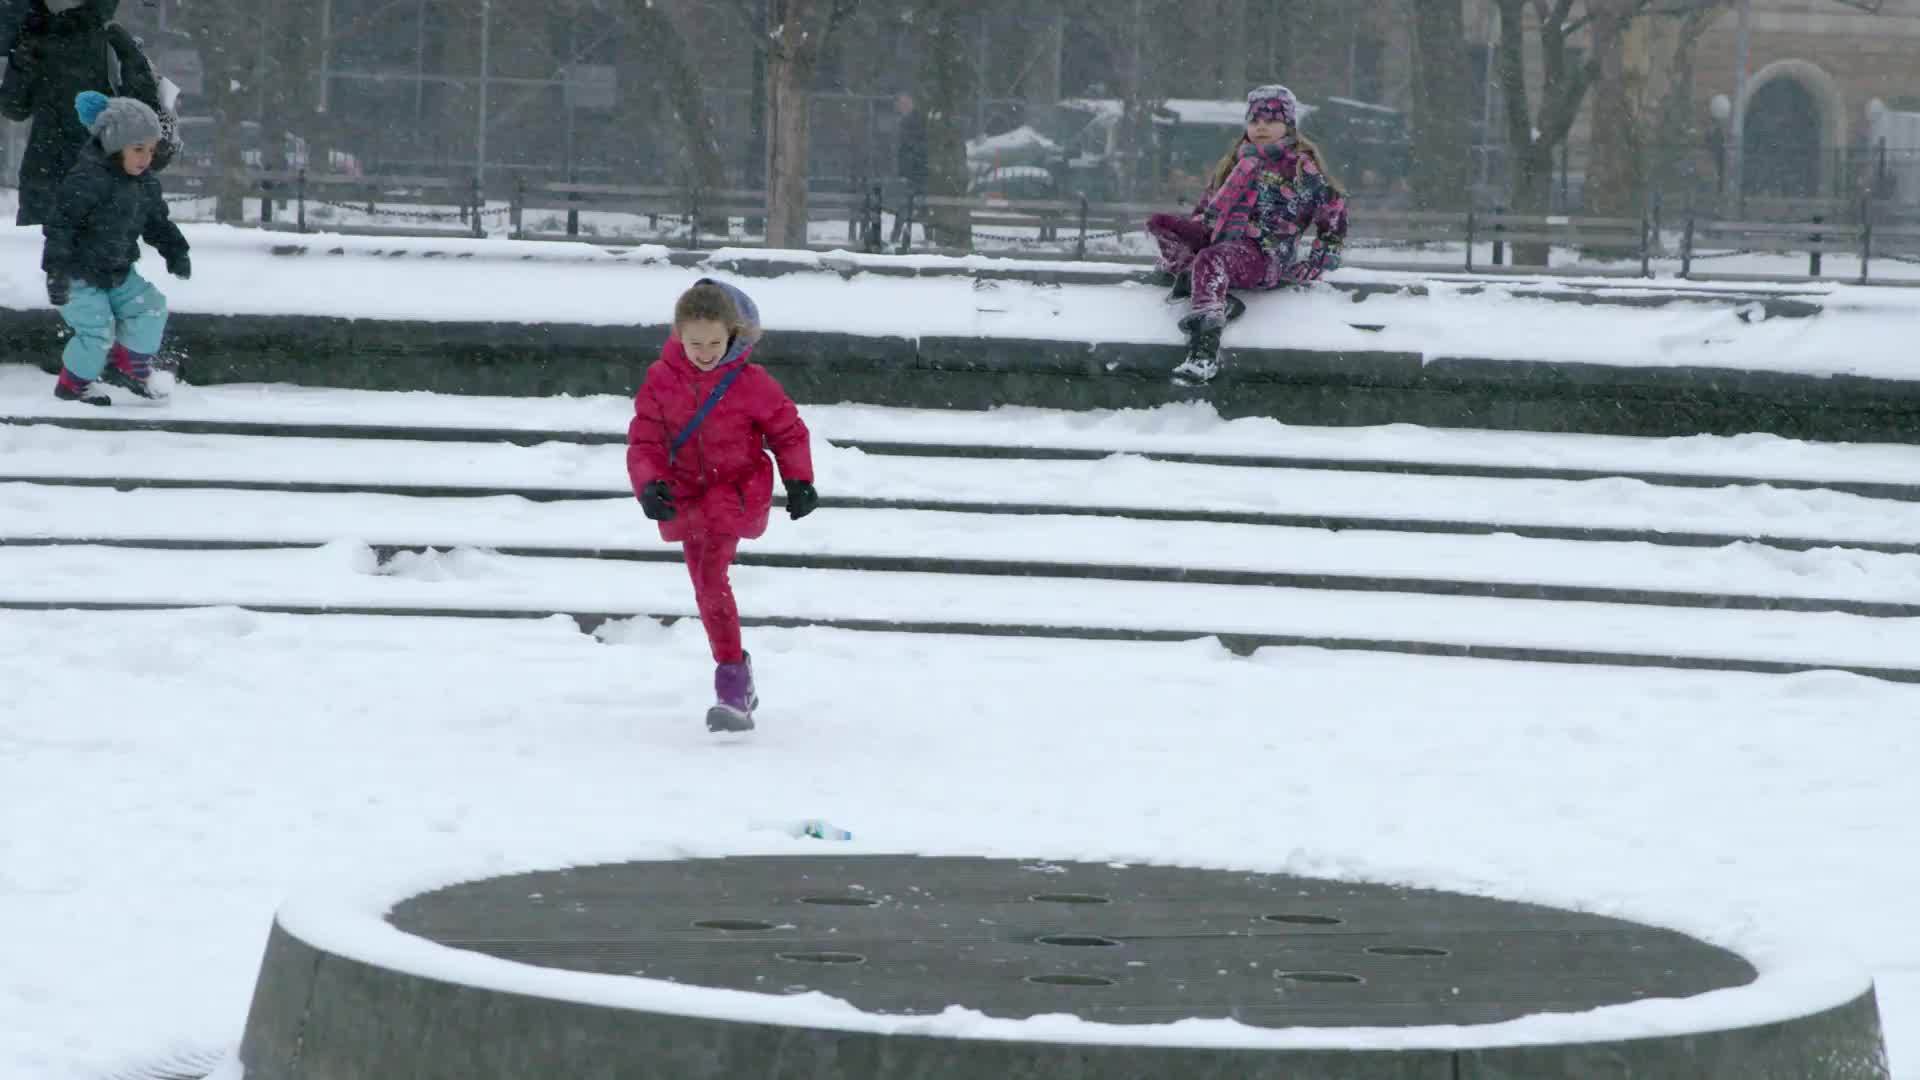 children running in slow motion - snow in Washington Square Park circle during winter blizzard - snowing in New York City NYC 4K and 1080 HD